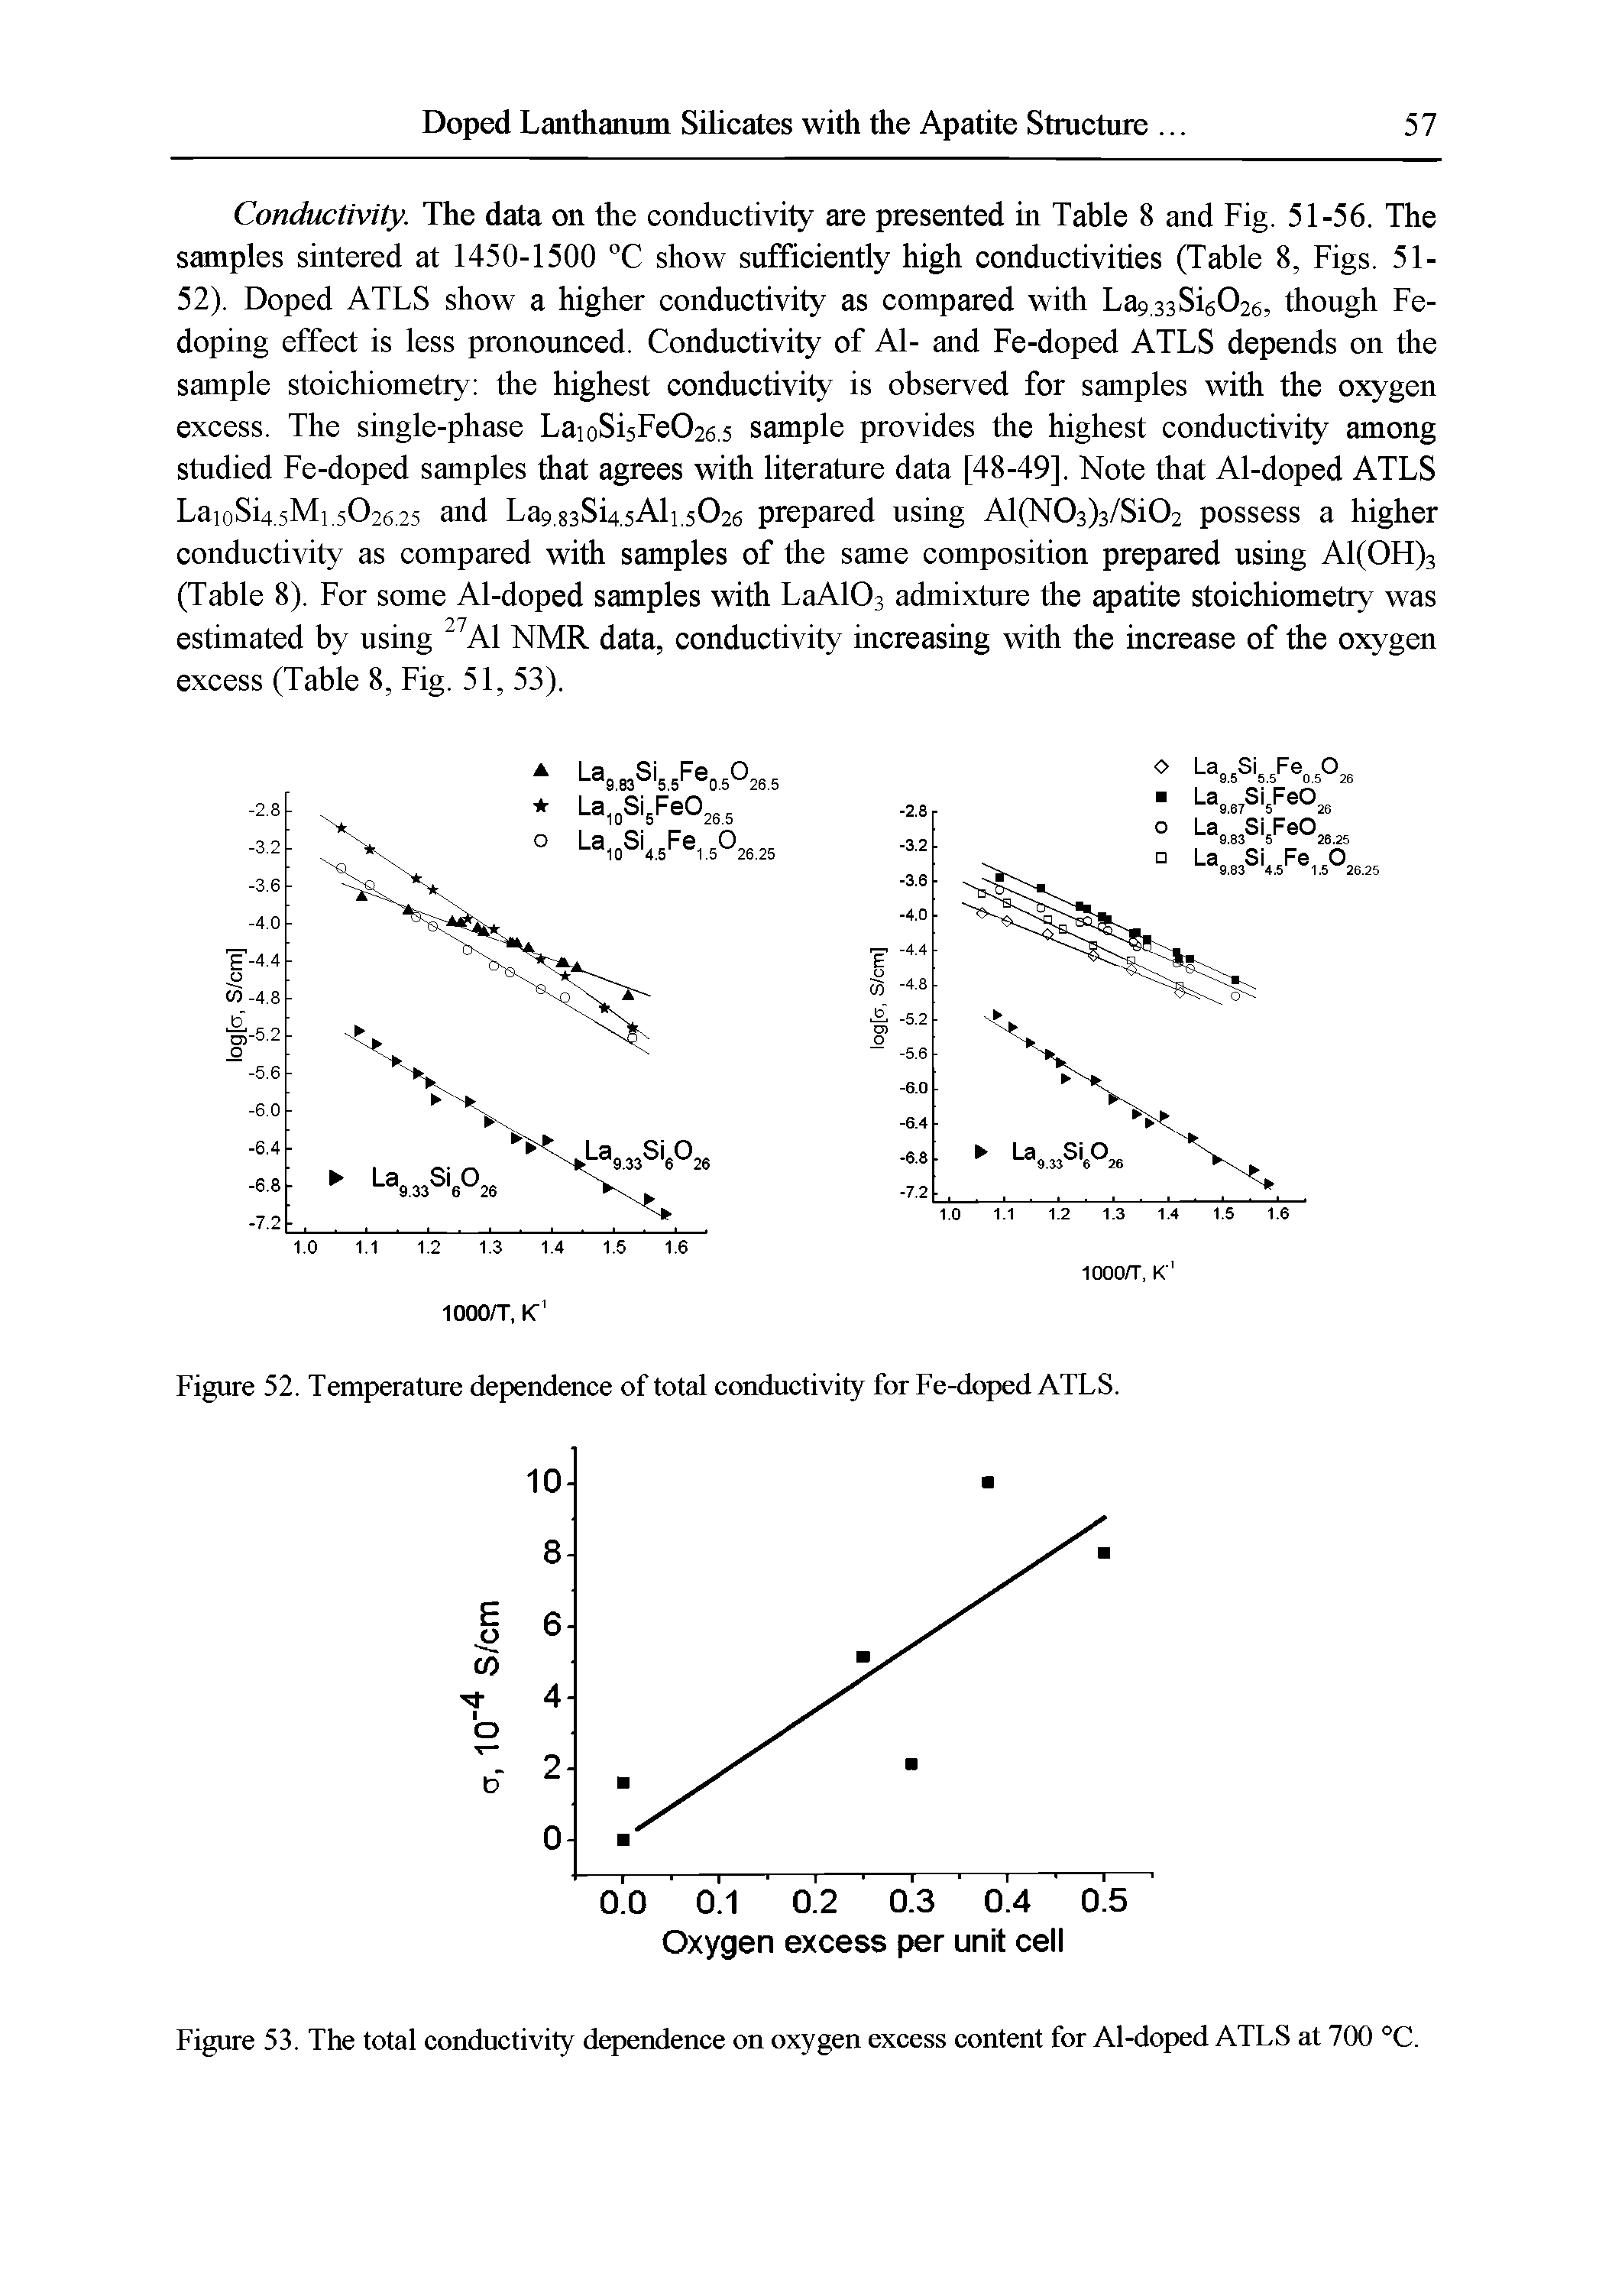 Figure 53. The total conductivity dependence on oxygen excess content for Al-doped ATLS at 700 °C.